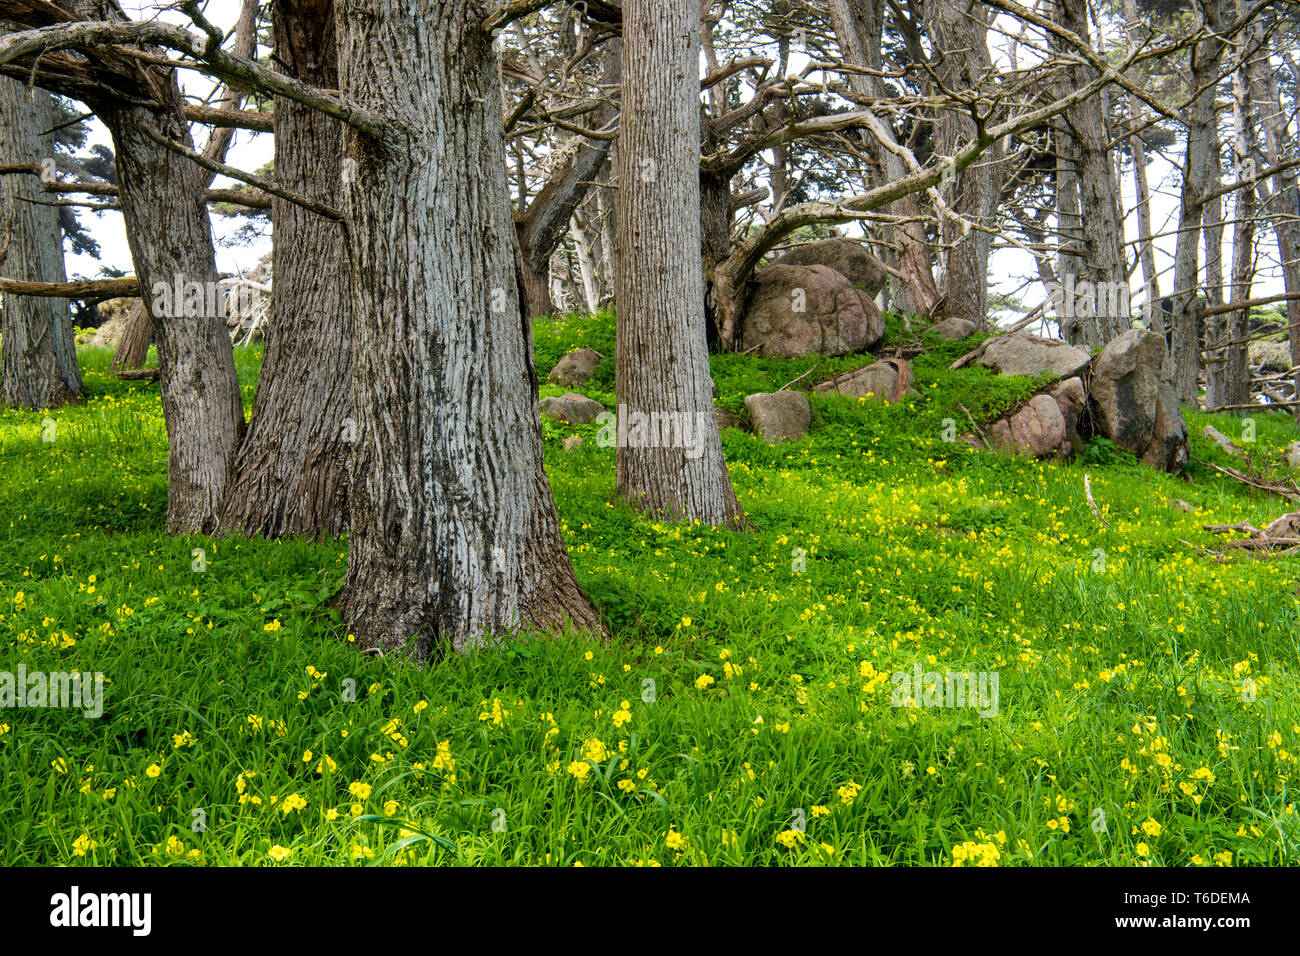 The tree trunks of Monterey cypress trees contrasted with the lush green grass of a wildflower-dotted meadow in Point Lobos, Carmel, California Stock Photo